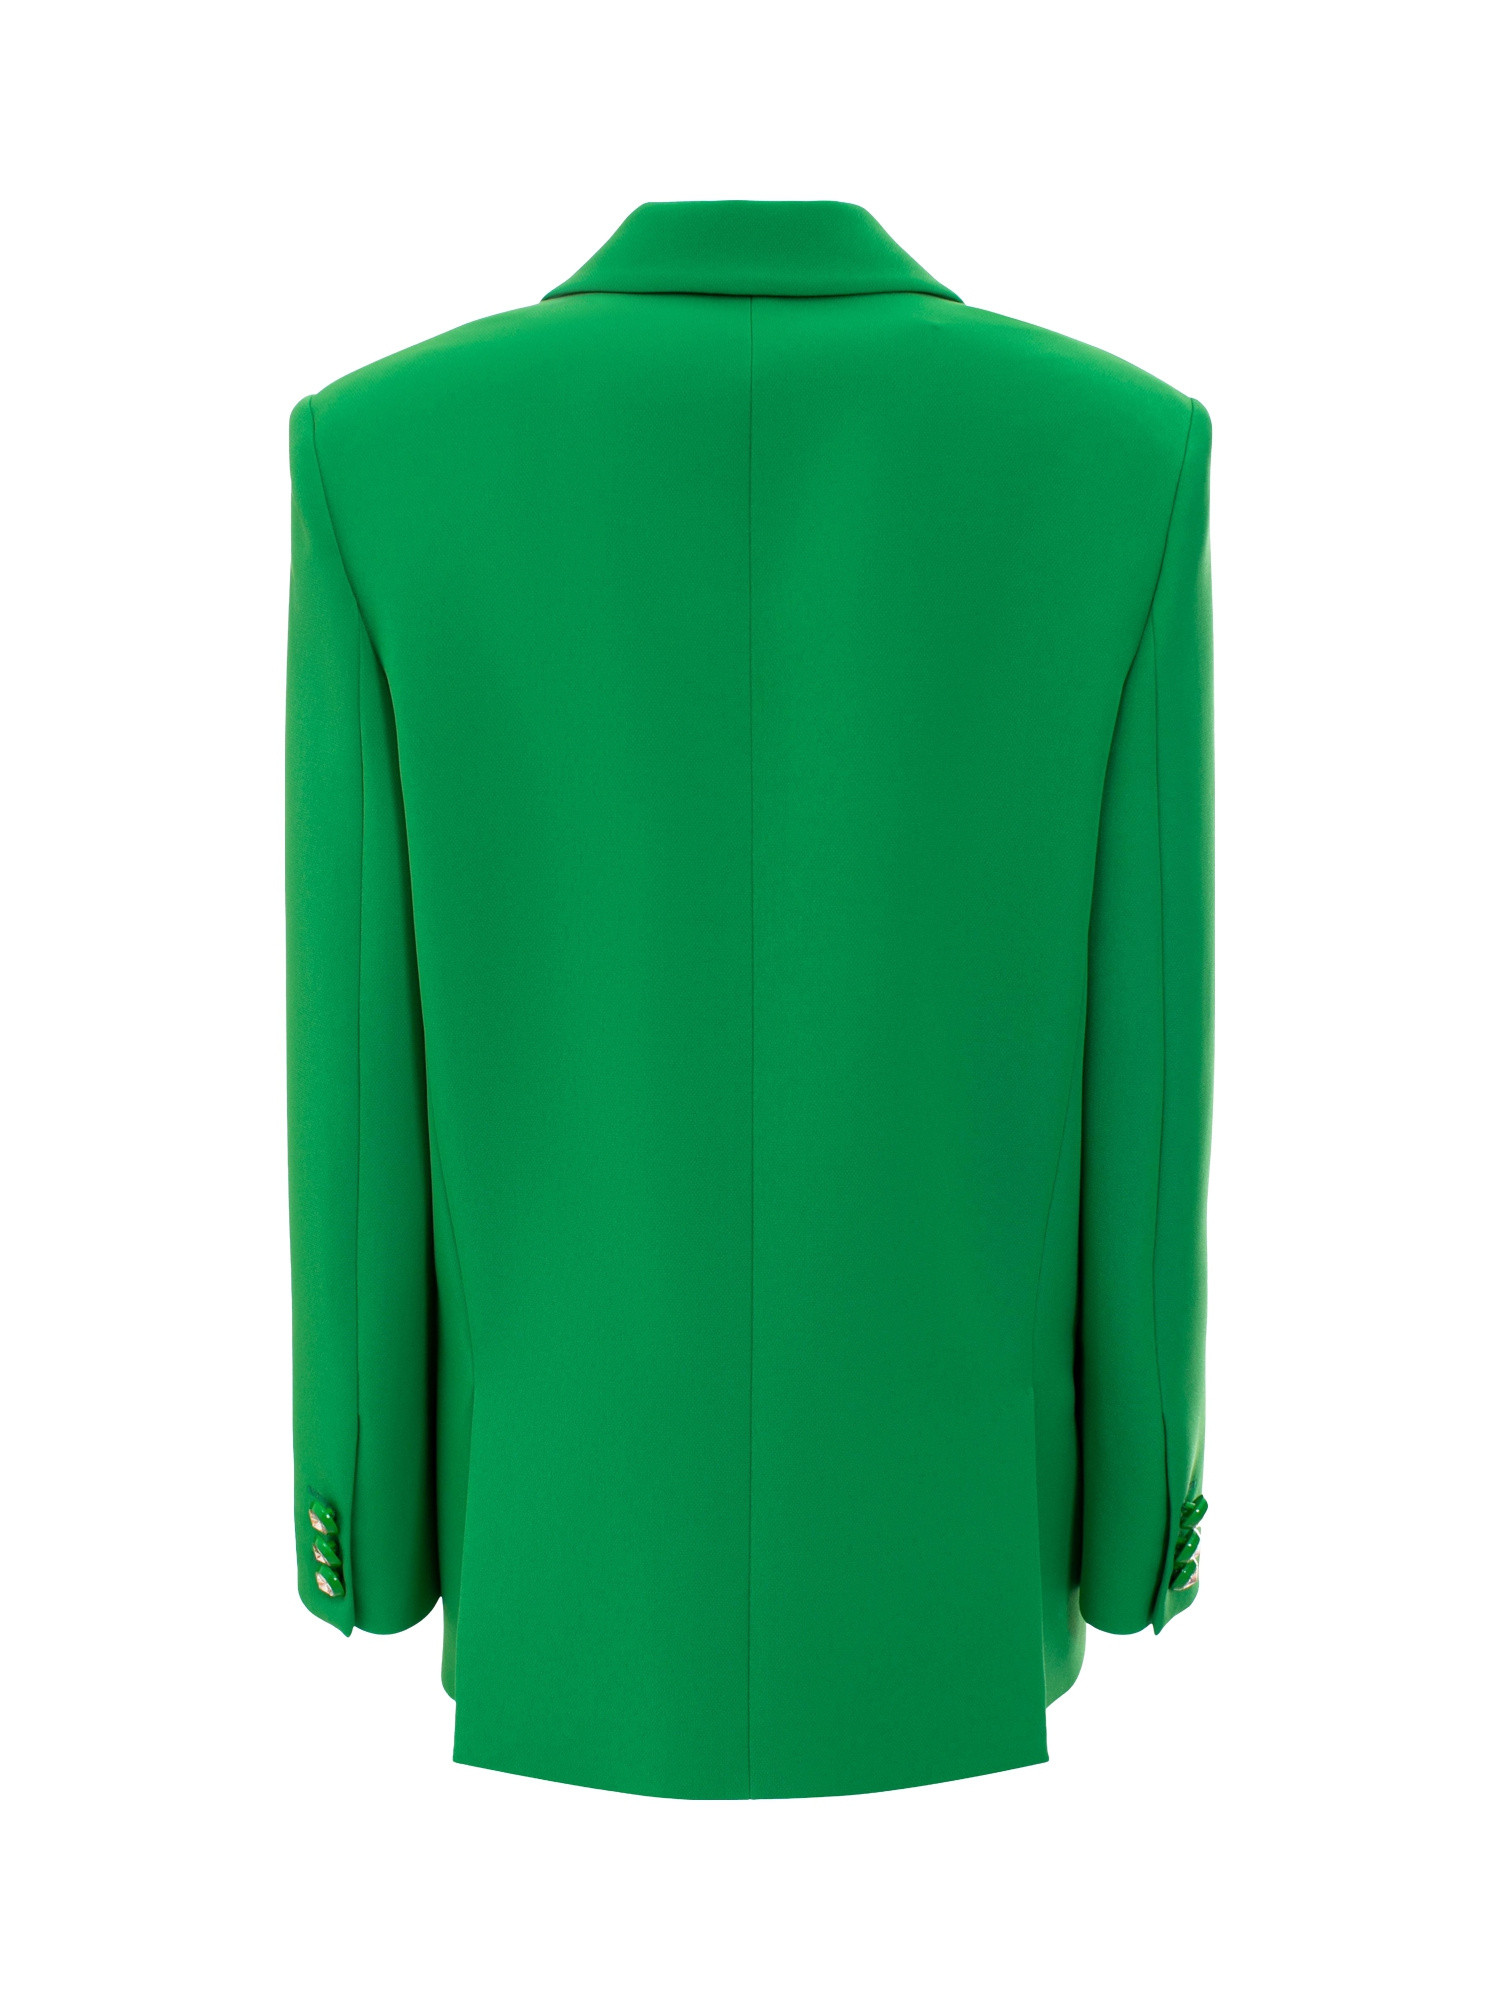 Chiara Ferragni - Double-breasted jacket with jewel buttons, Green, large image number 1